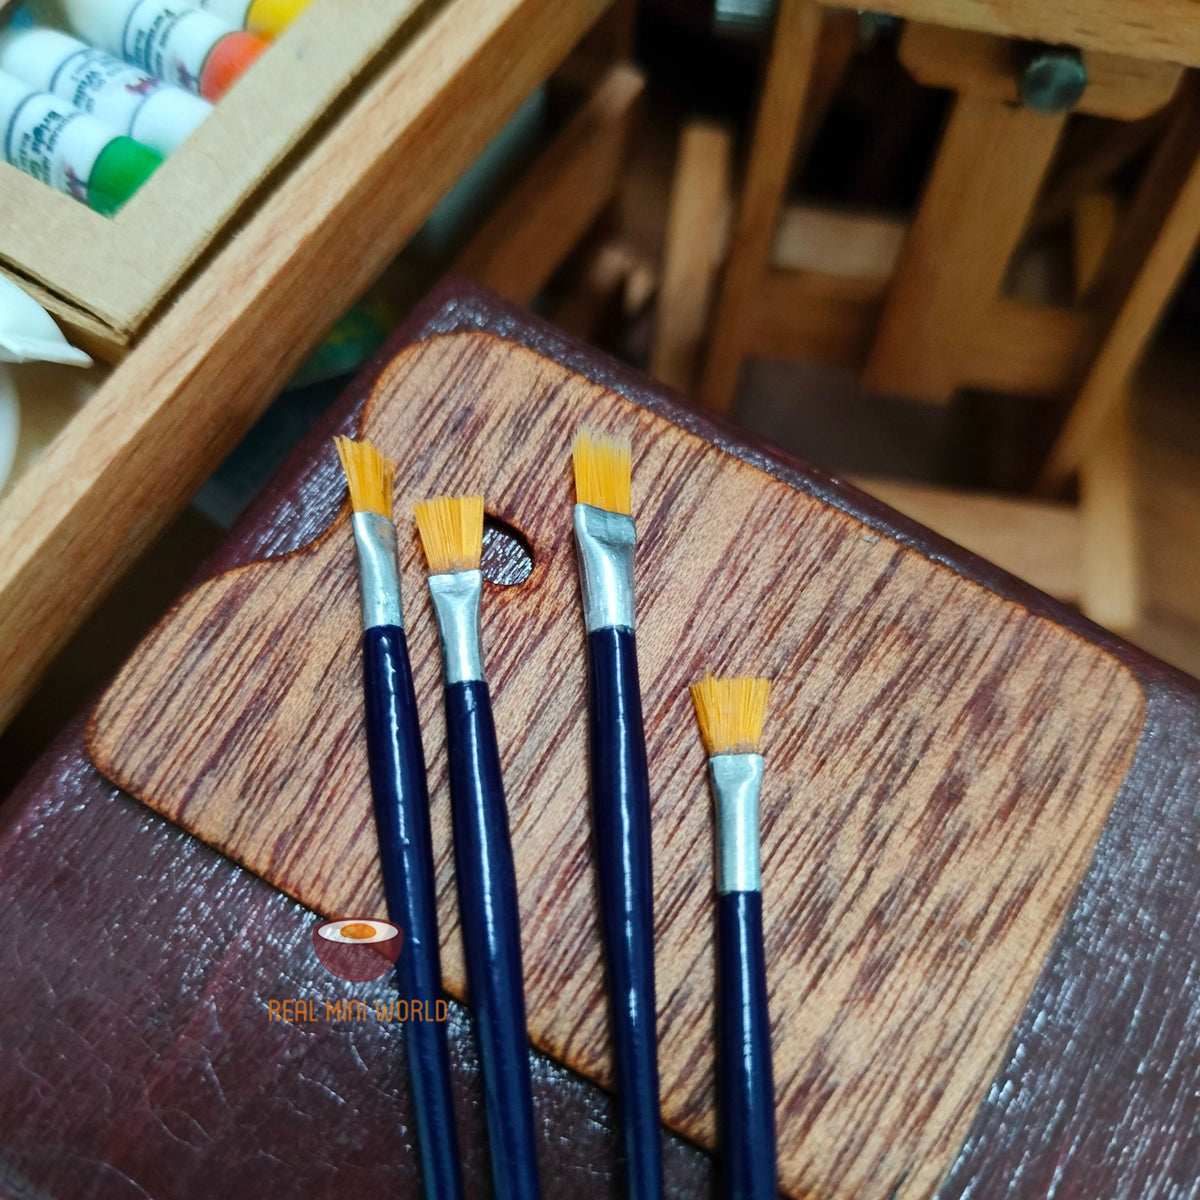 1:12 REAL WORKING miniature paint brush (can make real tiny